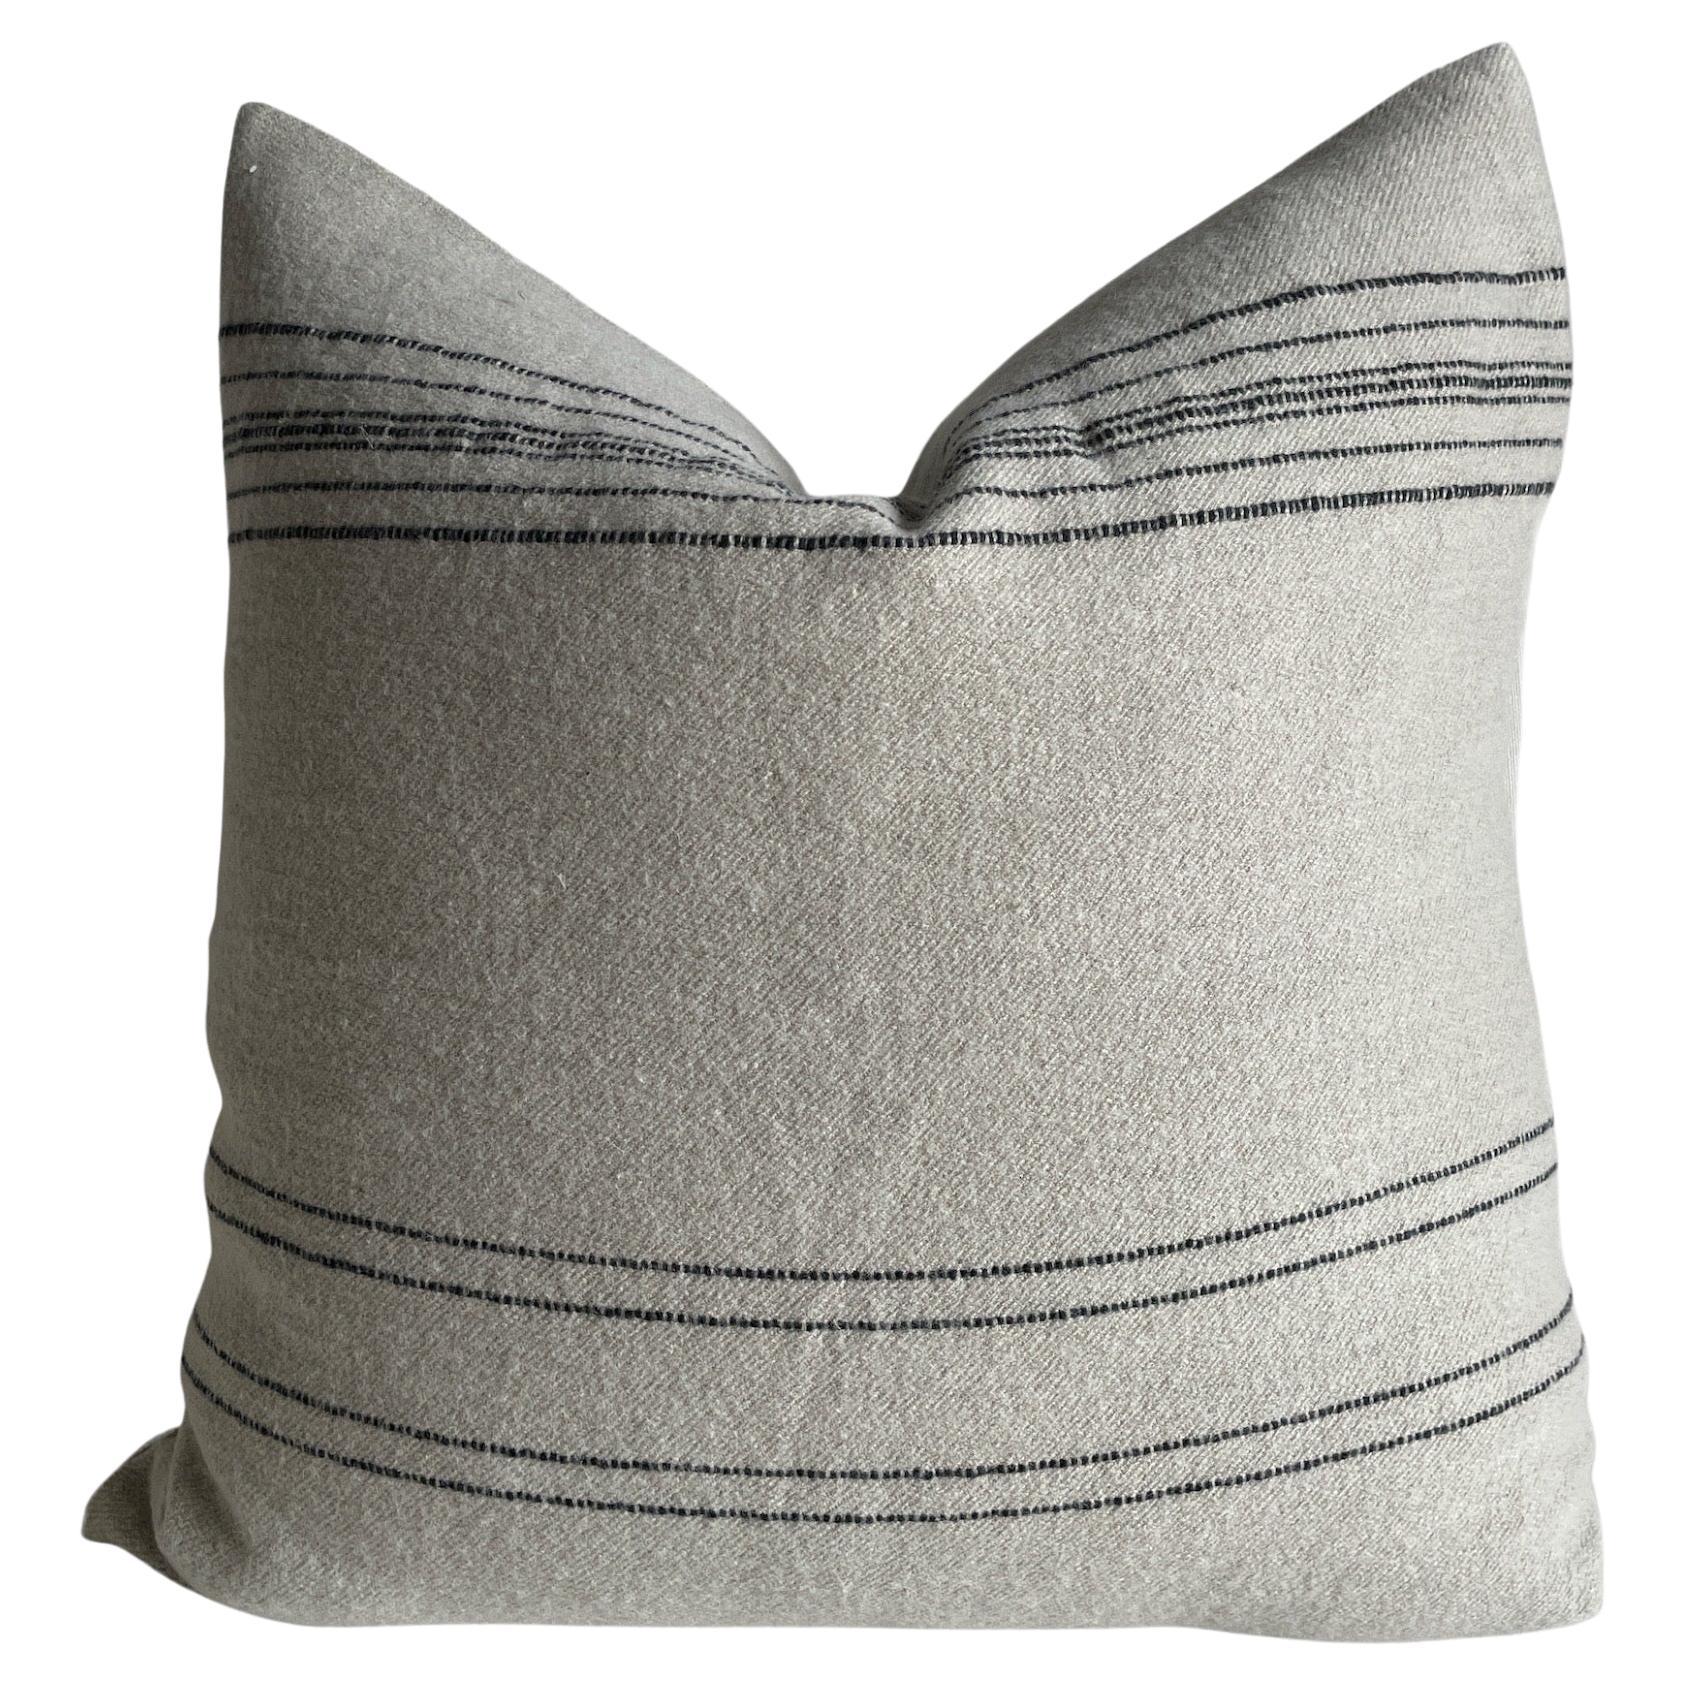 Belgian Linen and Wool Oversize Pillow Cover in Oatmeal and Coal For Sale